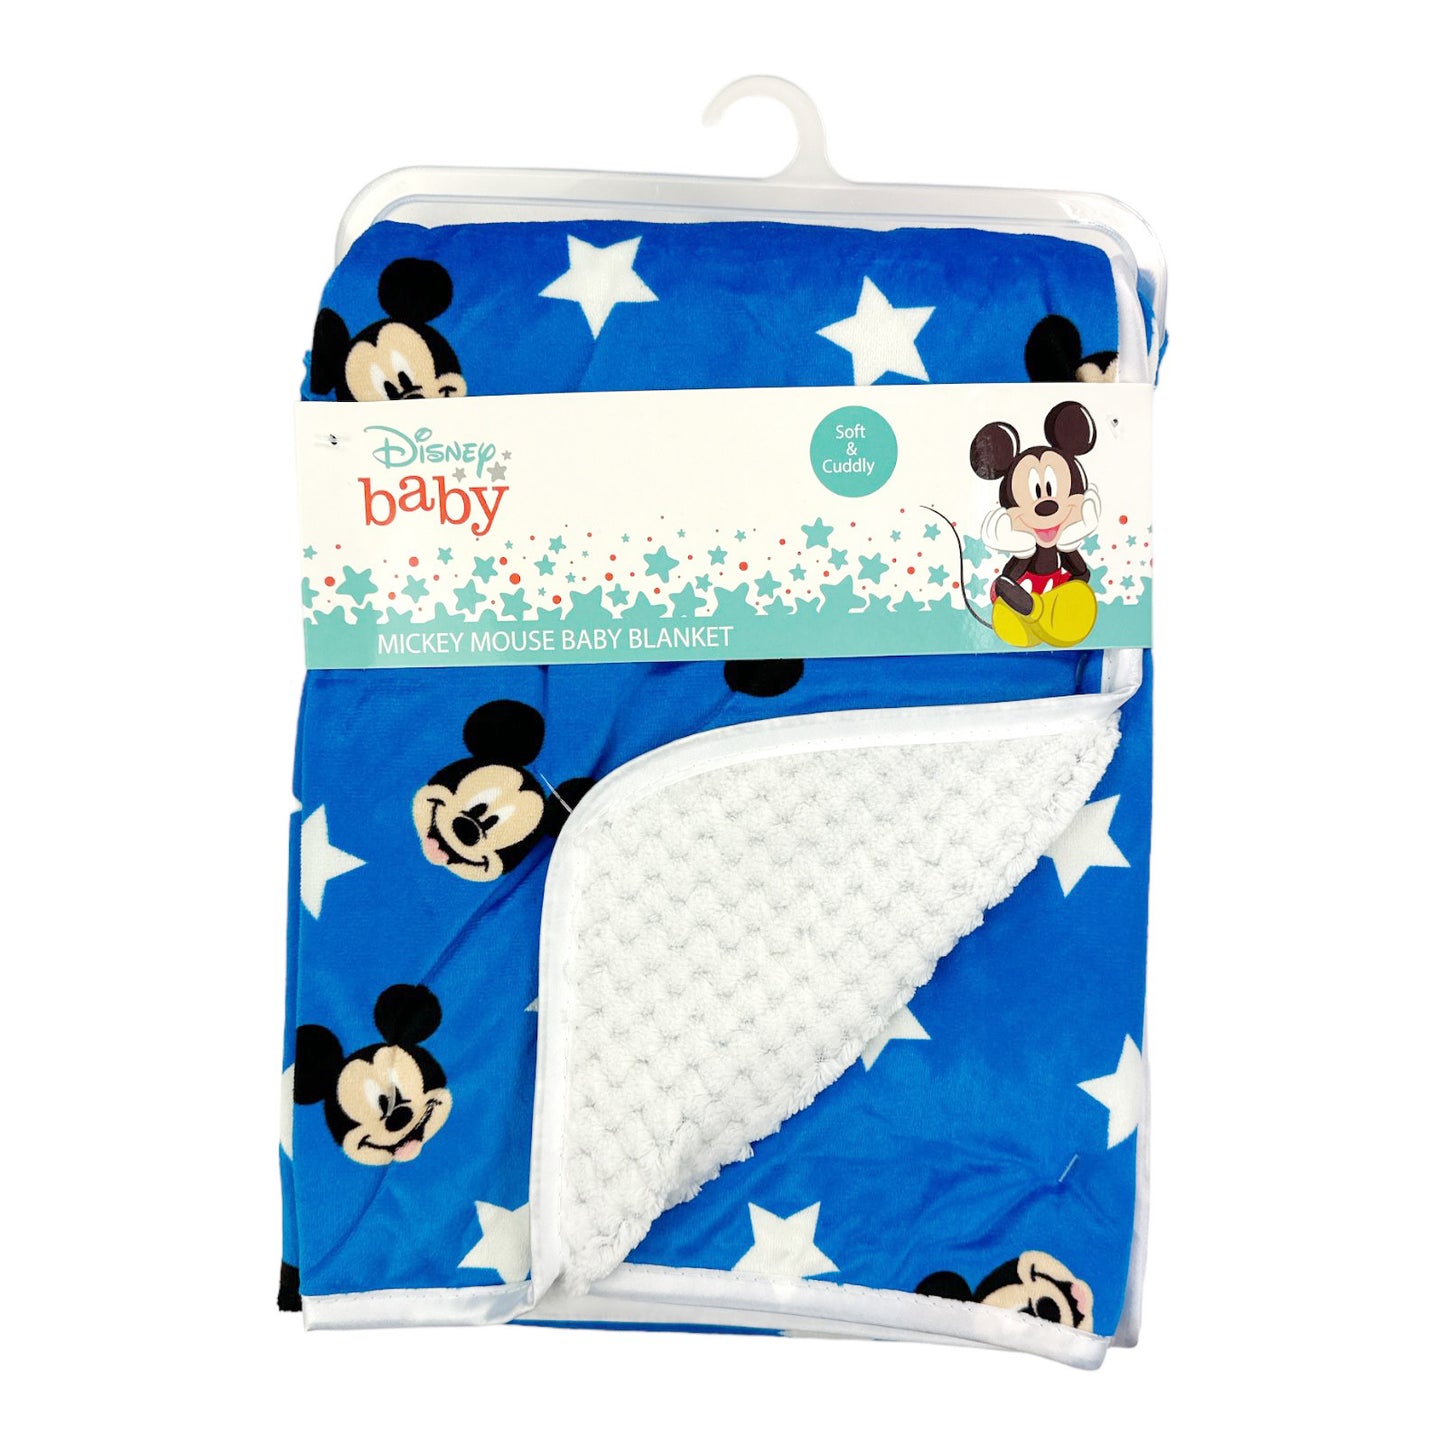 MICKEY MOUSE Plush Baby Blanket (Pack of 4)